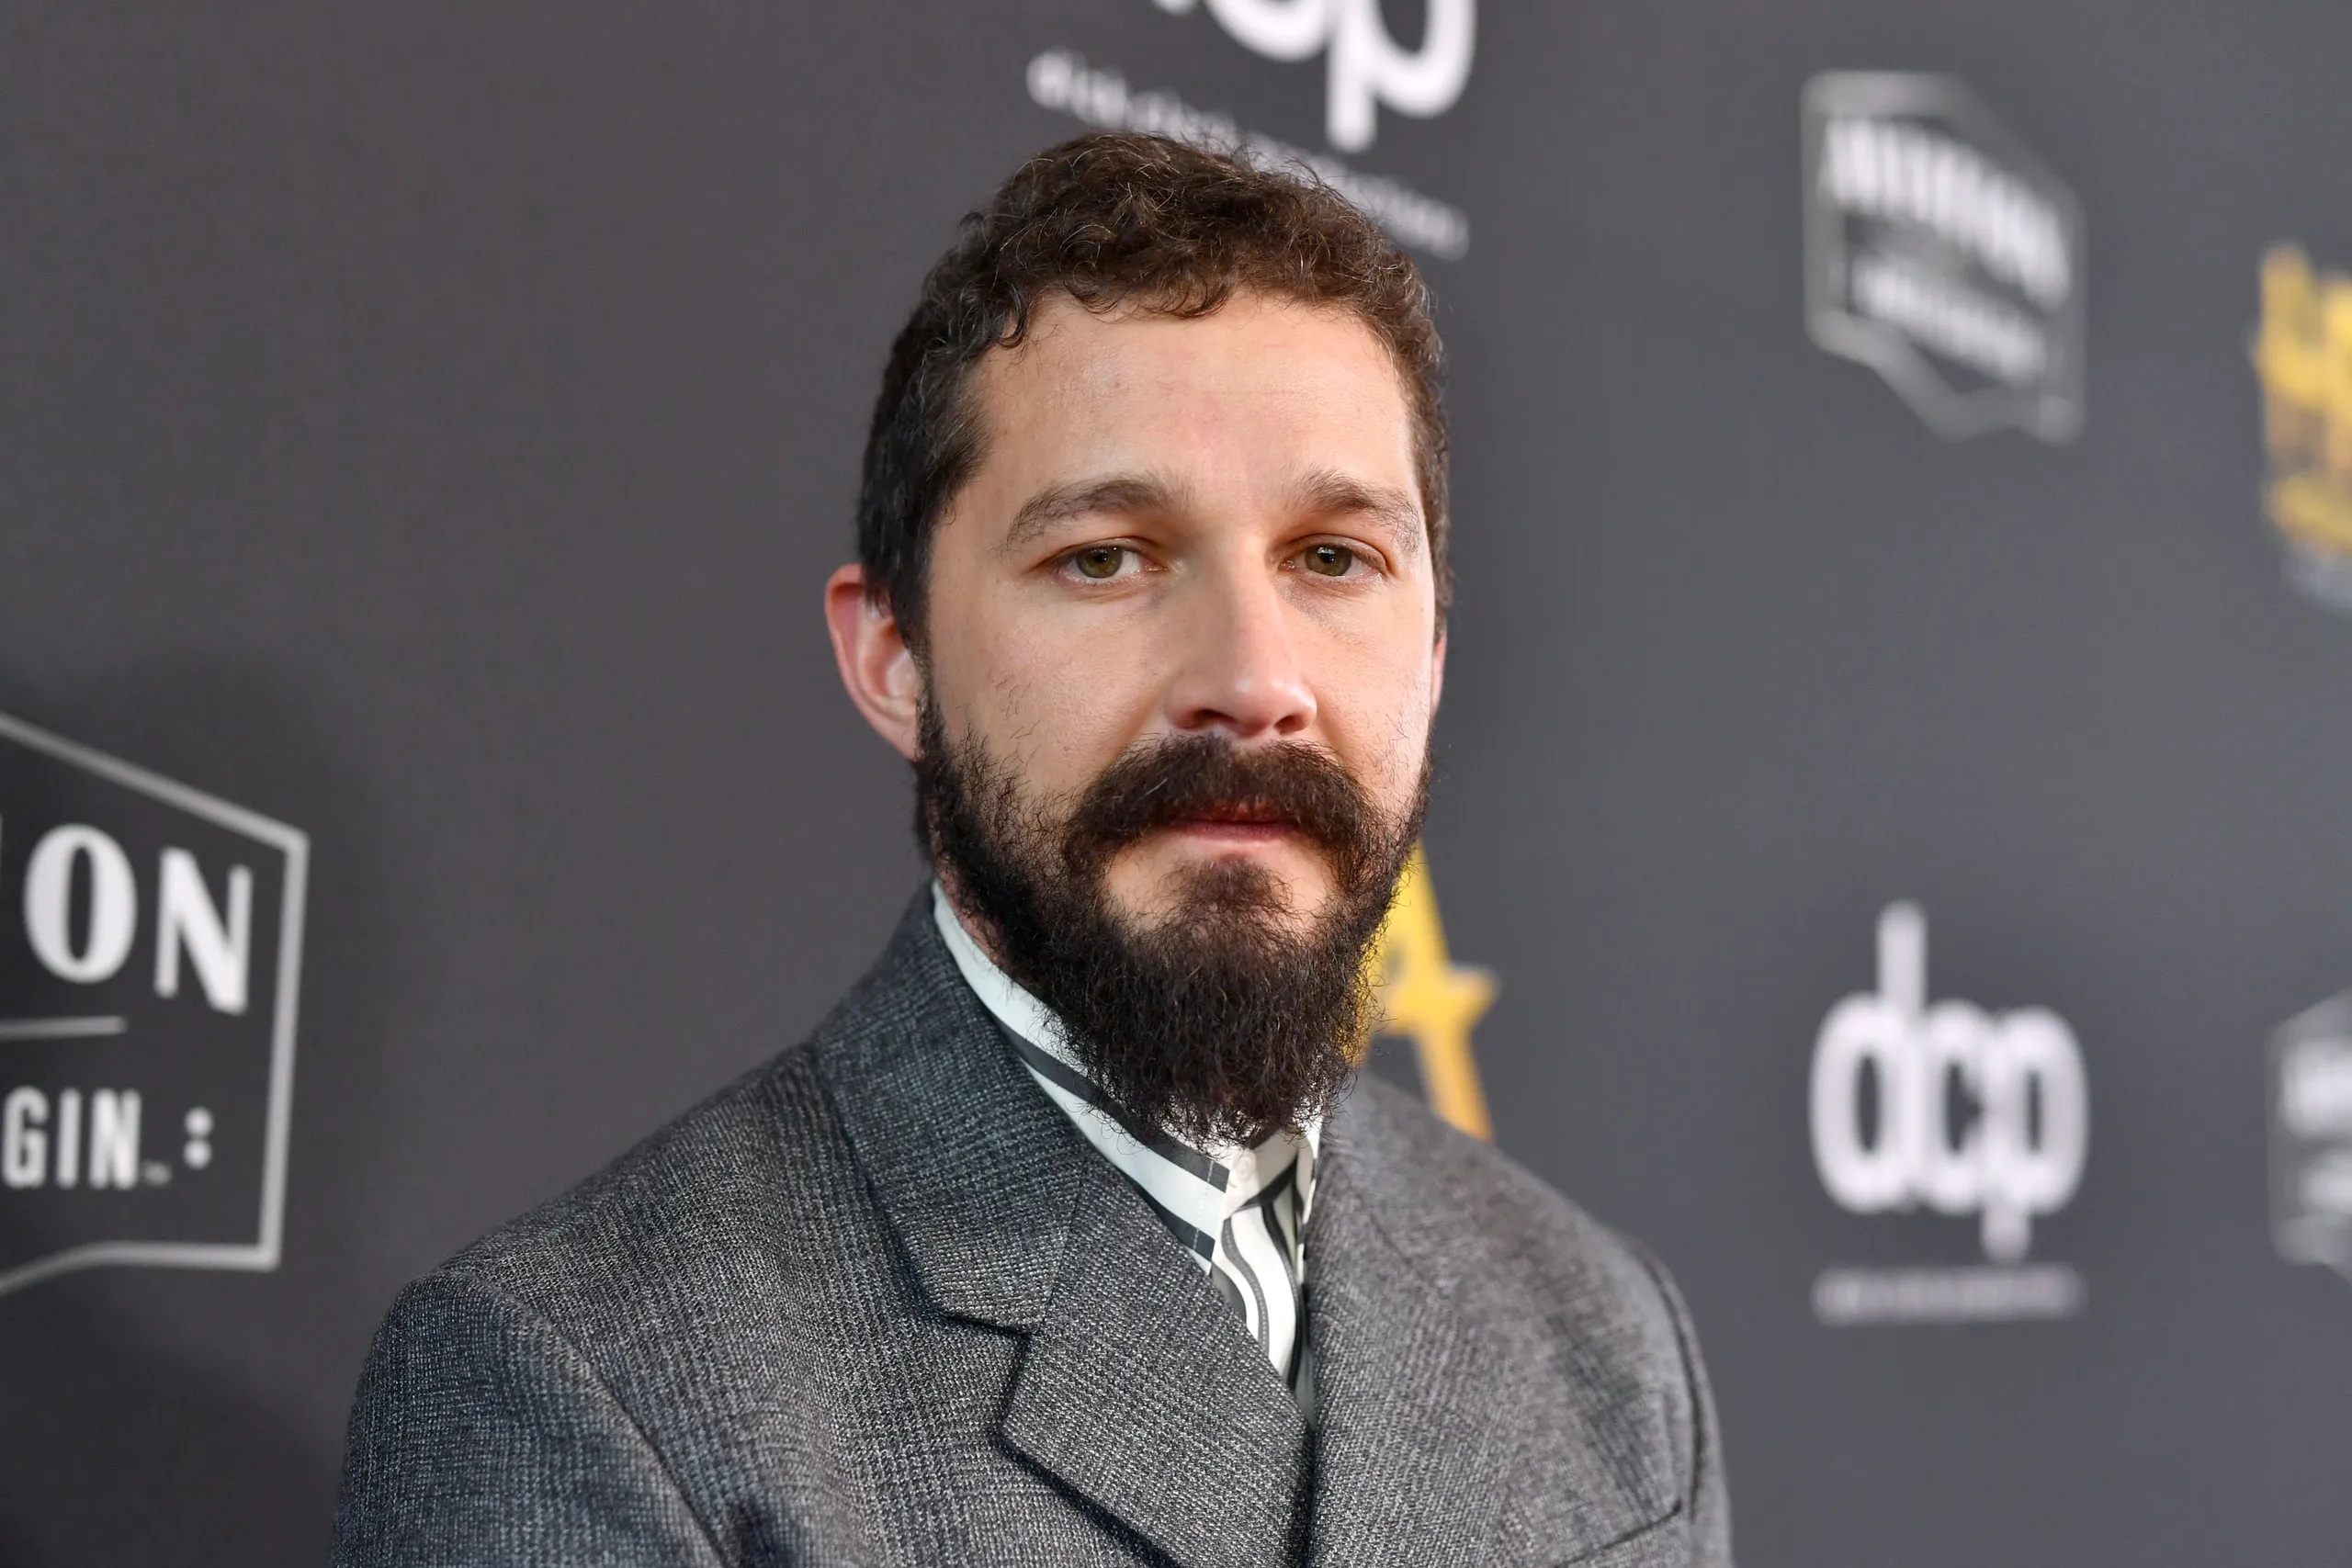 Shia LaBeouf Pulls Own Tooth for Movie Role: Behind His Extreme Acting in 'Fury